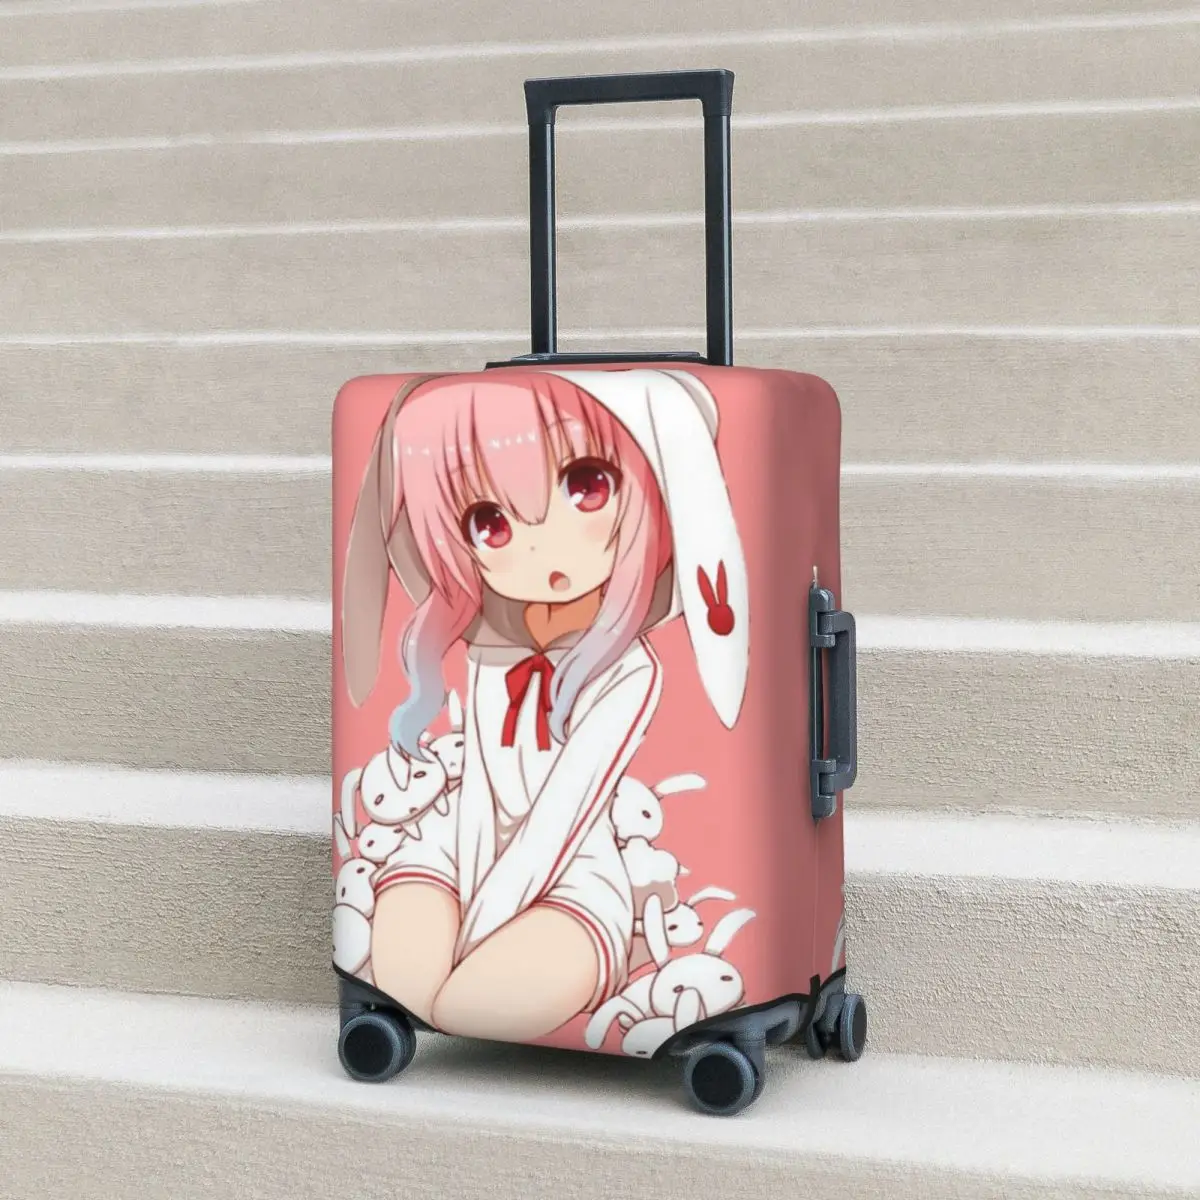 Anime Rabbit Girl Loli Chan Suitcase Cover Anime cute manga aesthetic Business Protection Holiday Practical Luggage Accesories